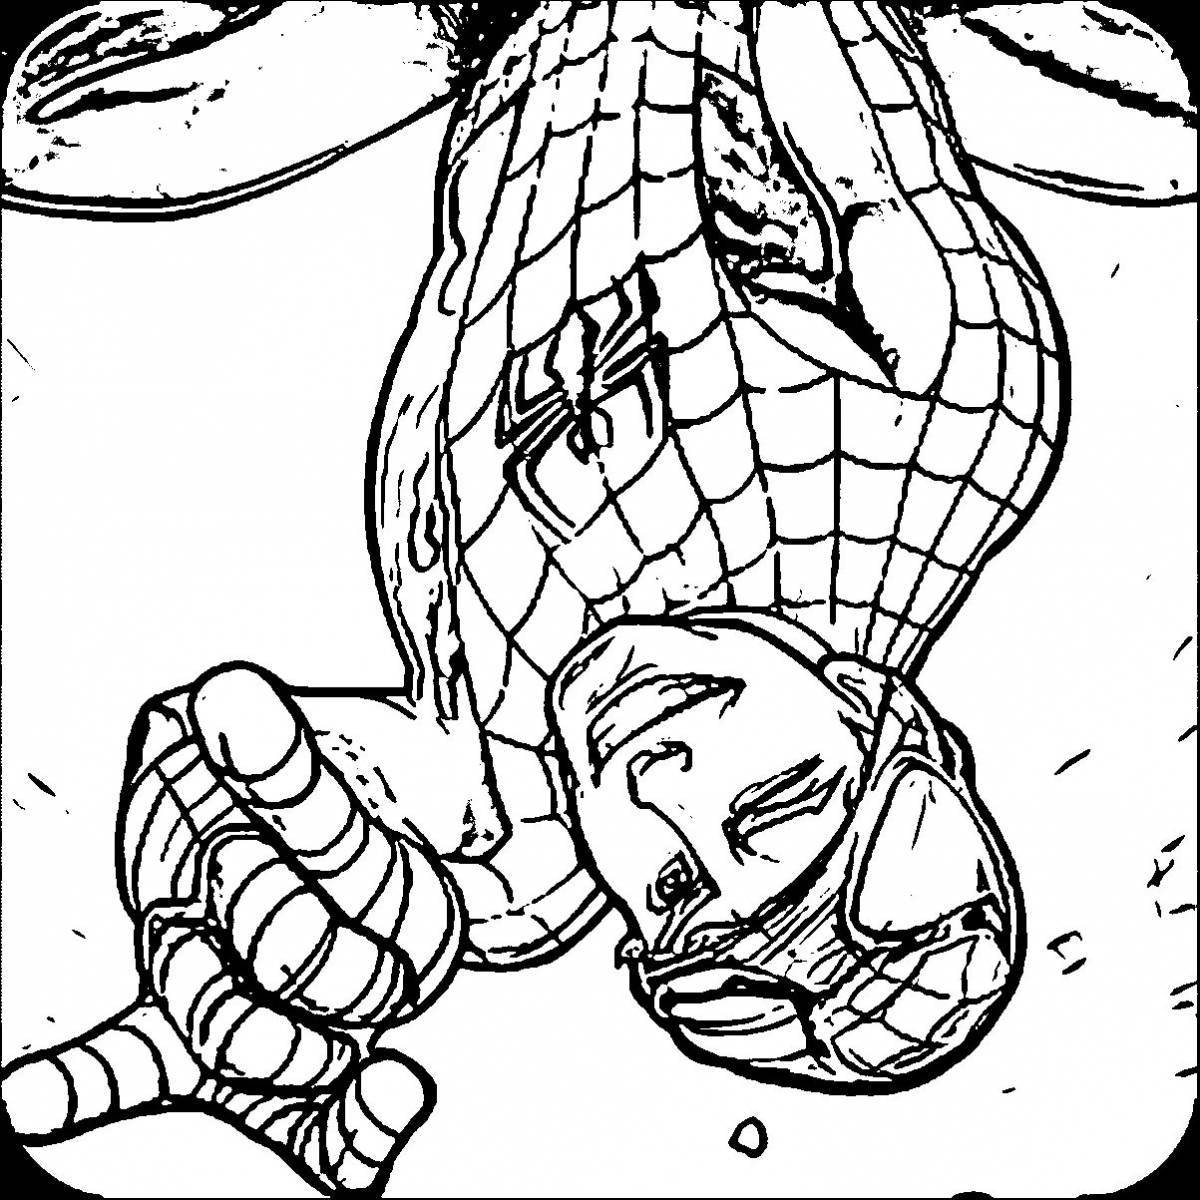 Spiderman freaky robot coloring page